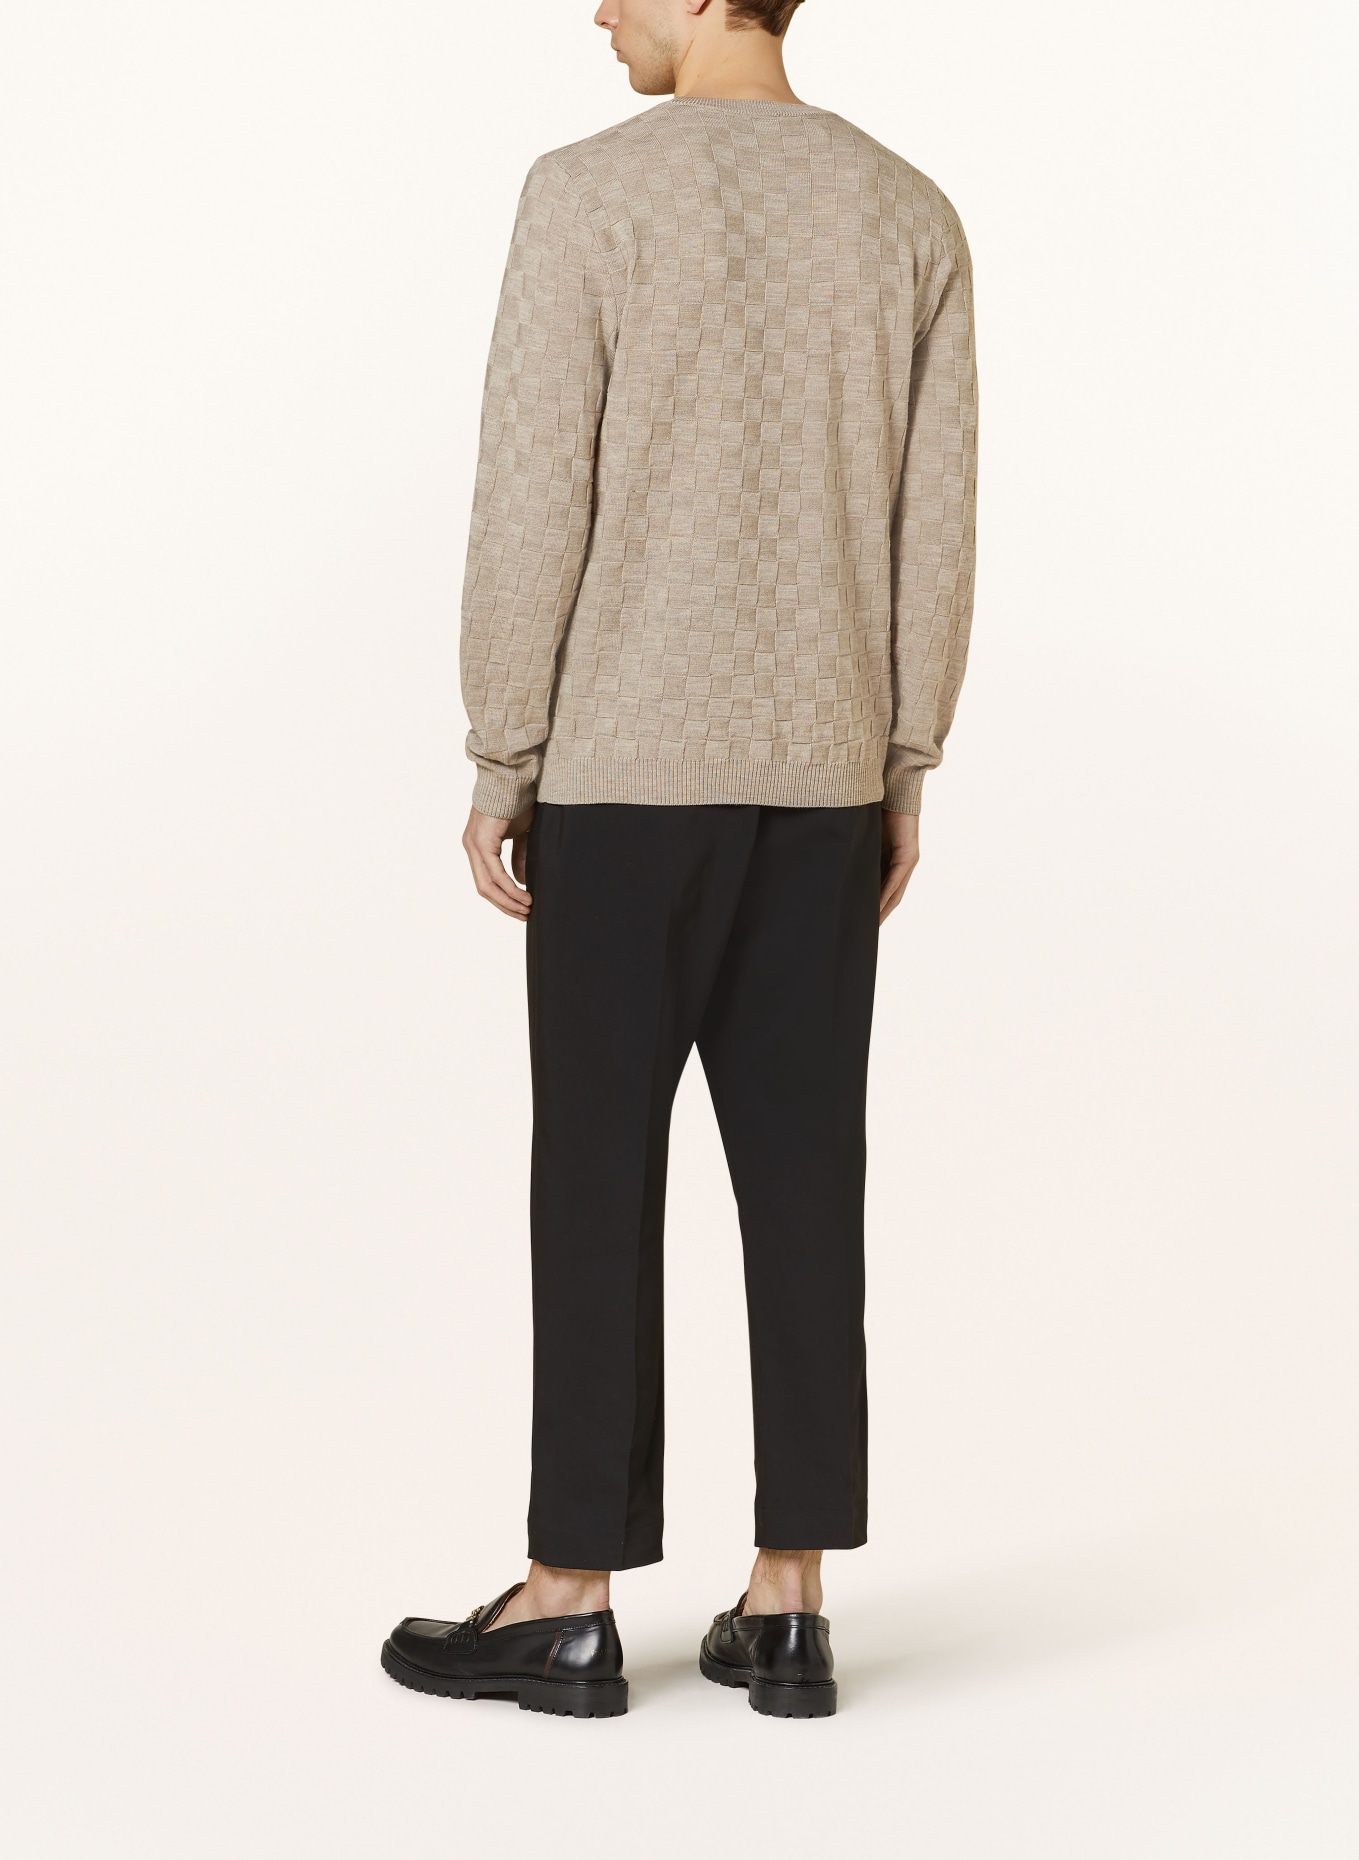 MAERZ MUENCHEN Sweater, Color: BEIGE (Image 3)